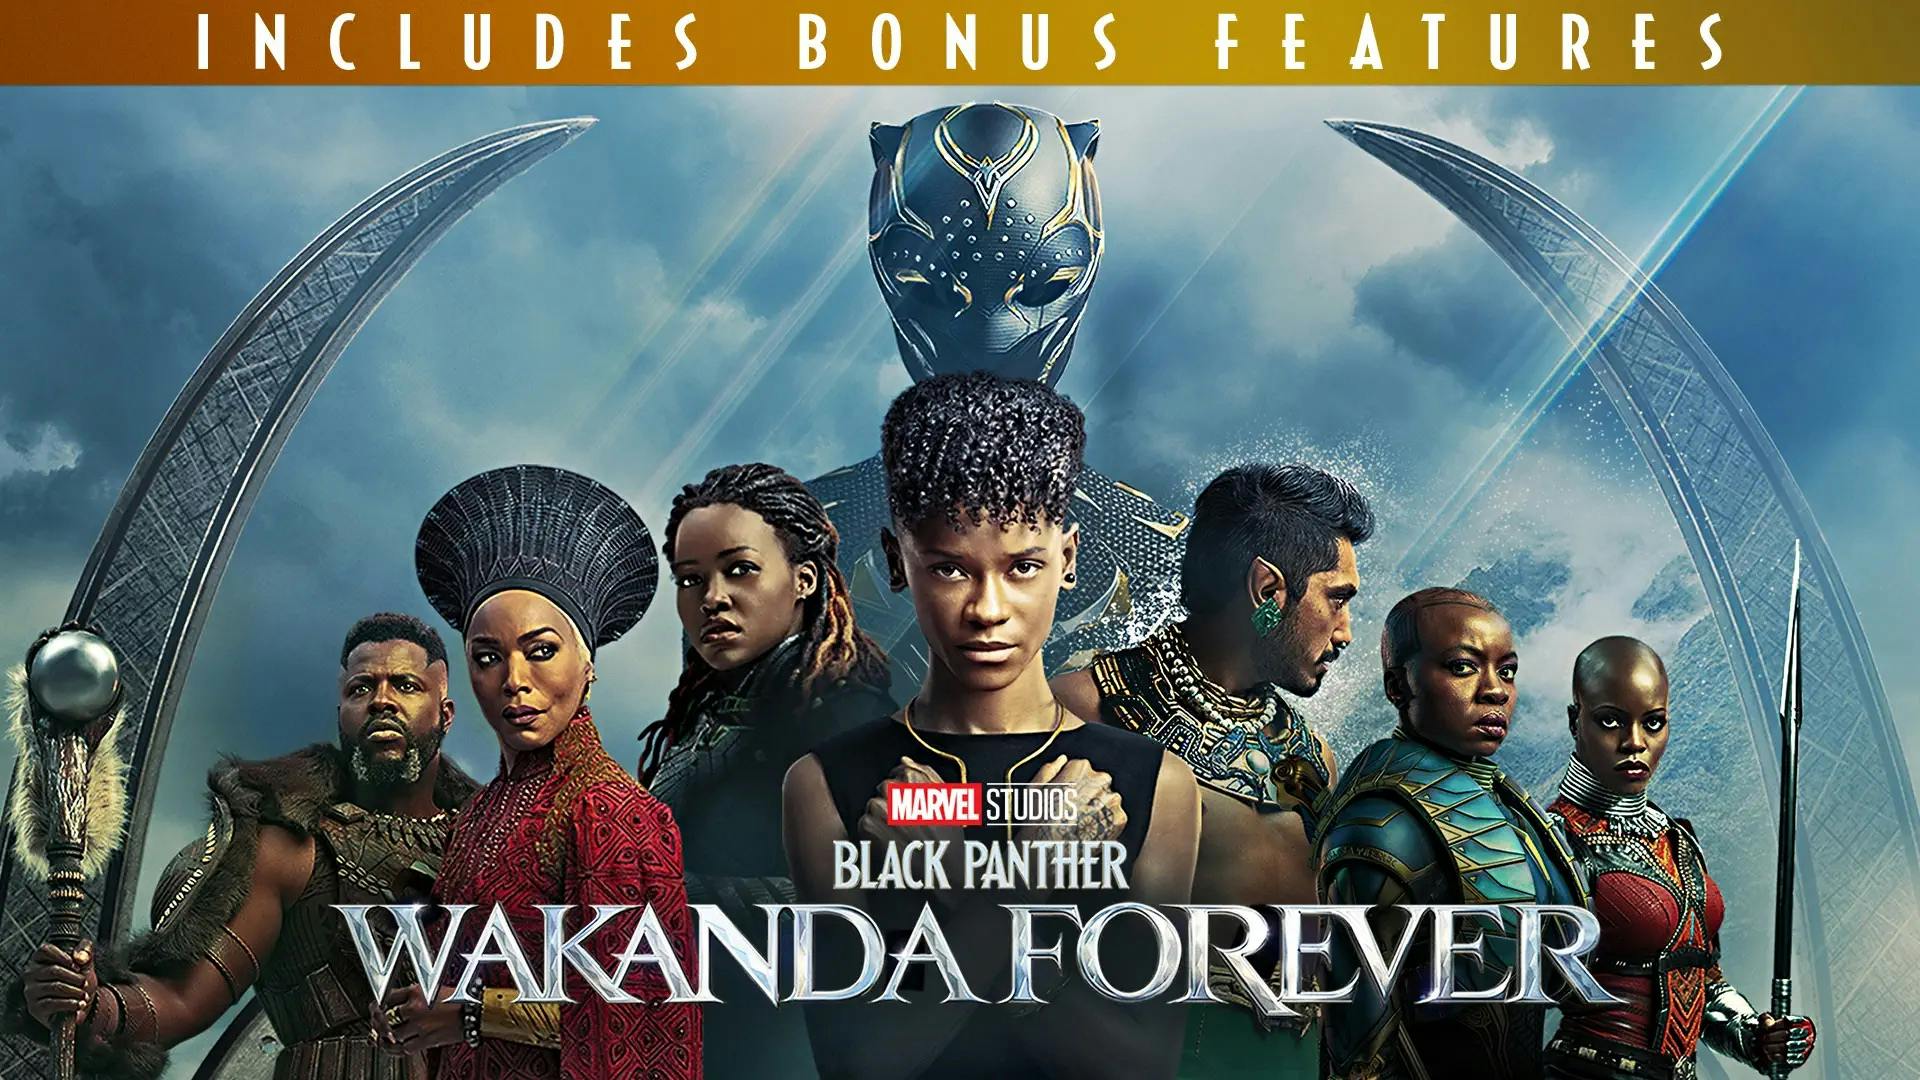 The thumbnail cover for the movie Black Panther Wakanda Forever